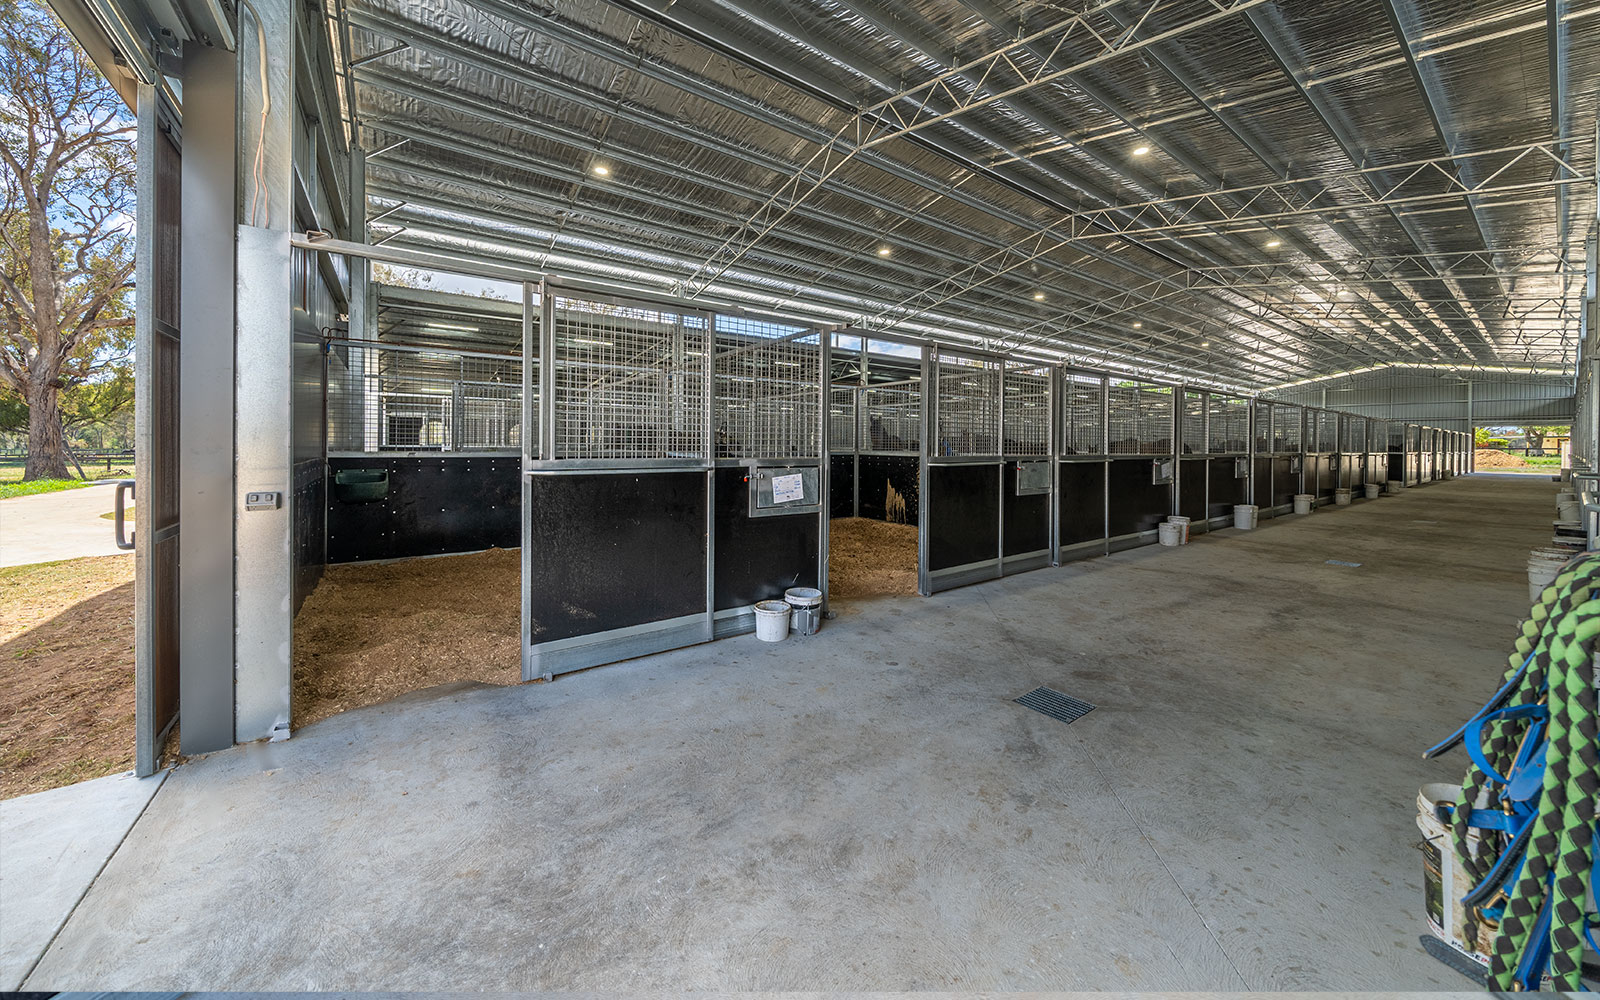 Yulong Stud stable complex